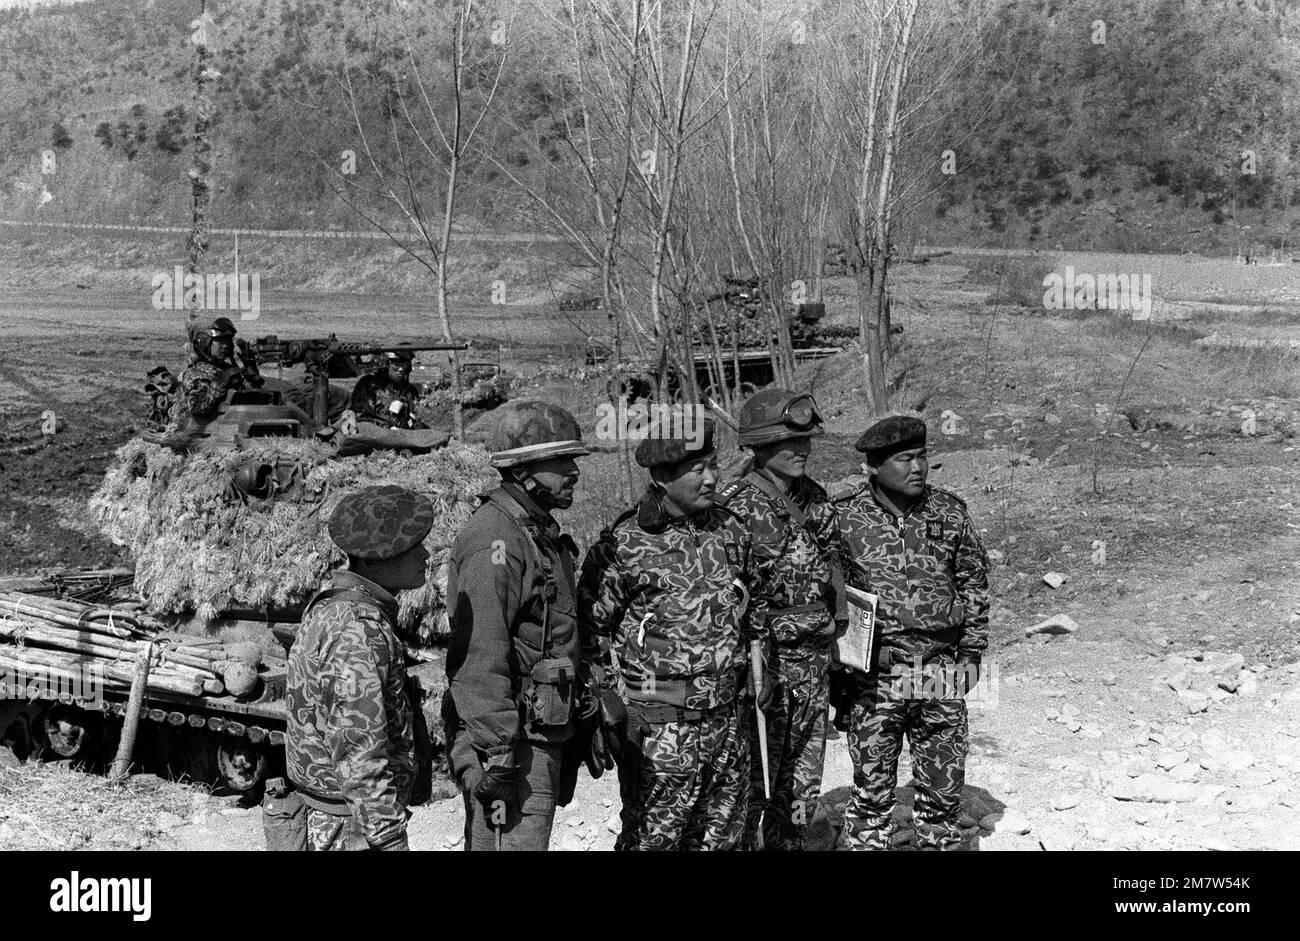 LCOL Michael J. Sierra, commander, 1ST Bn., 35th Inf., 25th Infantry Div., second from the left, looks over the Combat Outpost Line in the Cheop Yeong Valley with members of the South Korean Army 2nd Tank Battalion during the joint South Korea/U.S. training exercise Team Spirit '82. Subject Operation/Series: TEAM SPIRIT '82 Base: Cheop Yeong Country: Republic Of Korea (KOR) Stock Photo